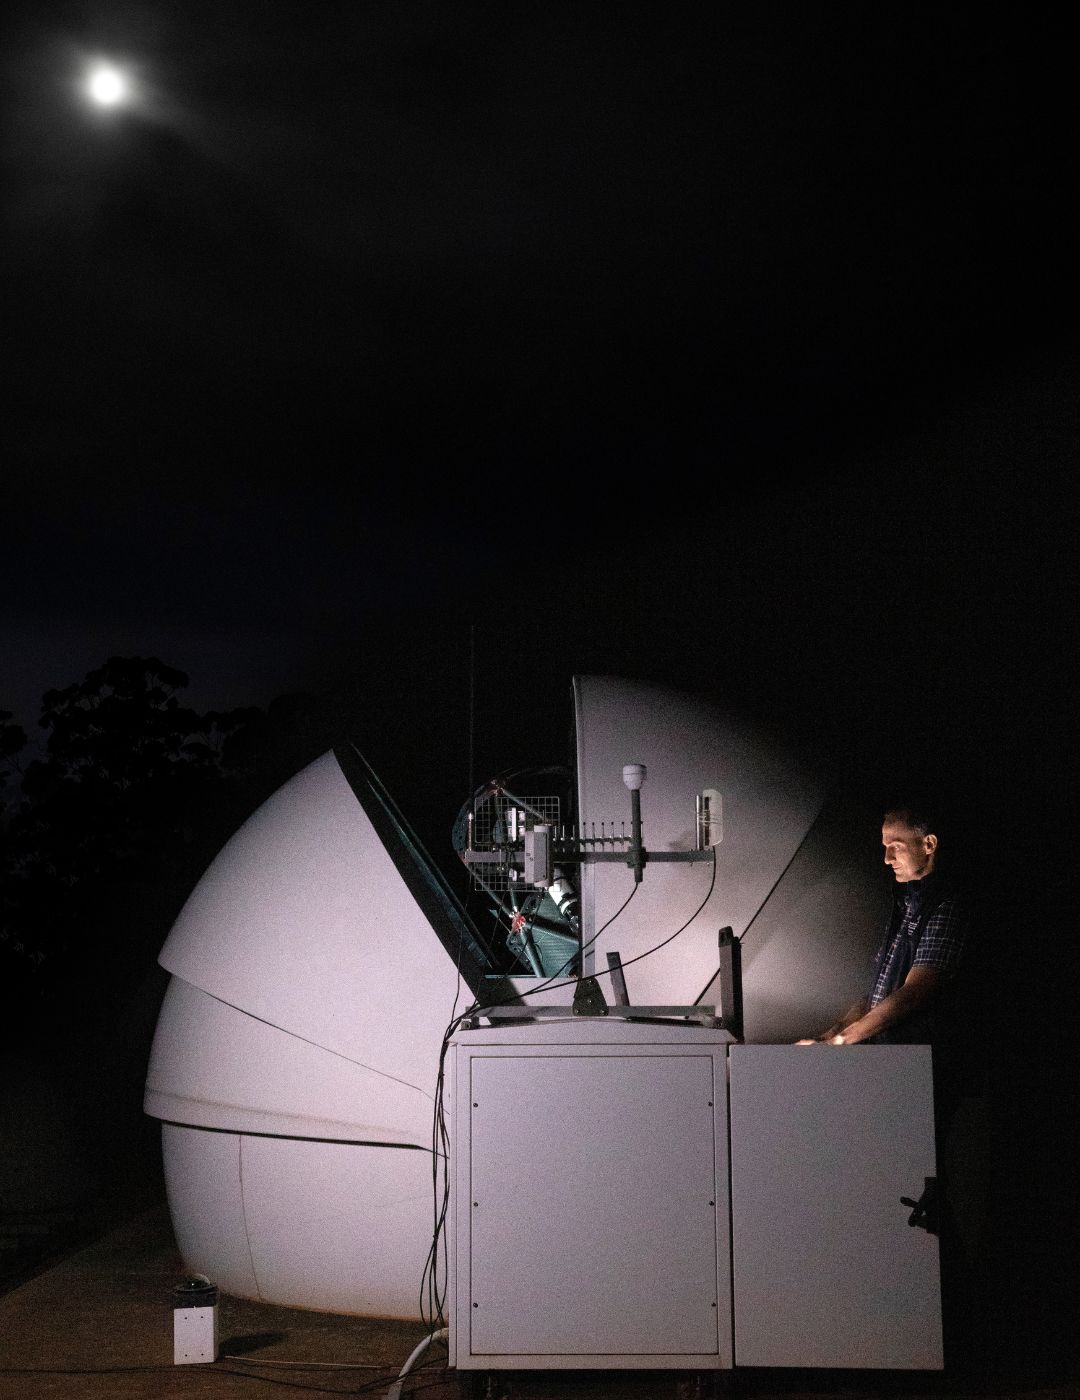 Researcher preparing the DSTG Space Domain Awareness (SDA) Telescope for collecting observations of satellites and debris in orbit around Earth, in preparation for a Sprint Advanced Concept Training exercise. The research instruments allow training, testing of new hardware, algorithm development and collaborative research with industry, academia and research organisations in Australia and overseas.